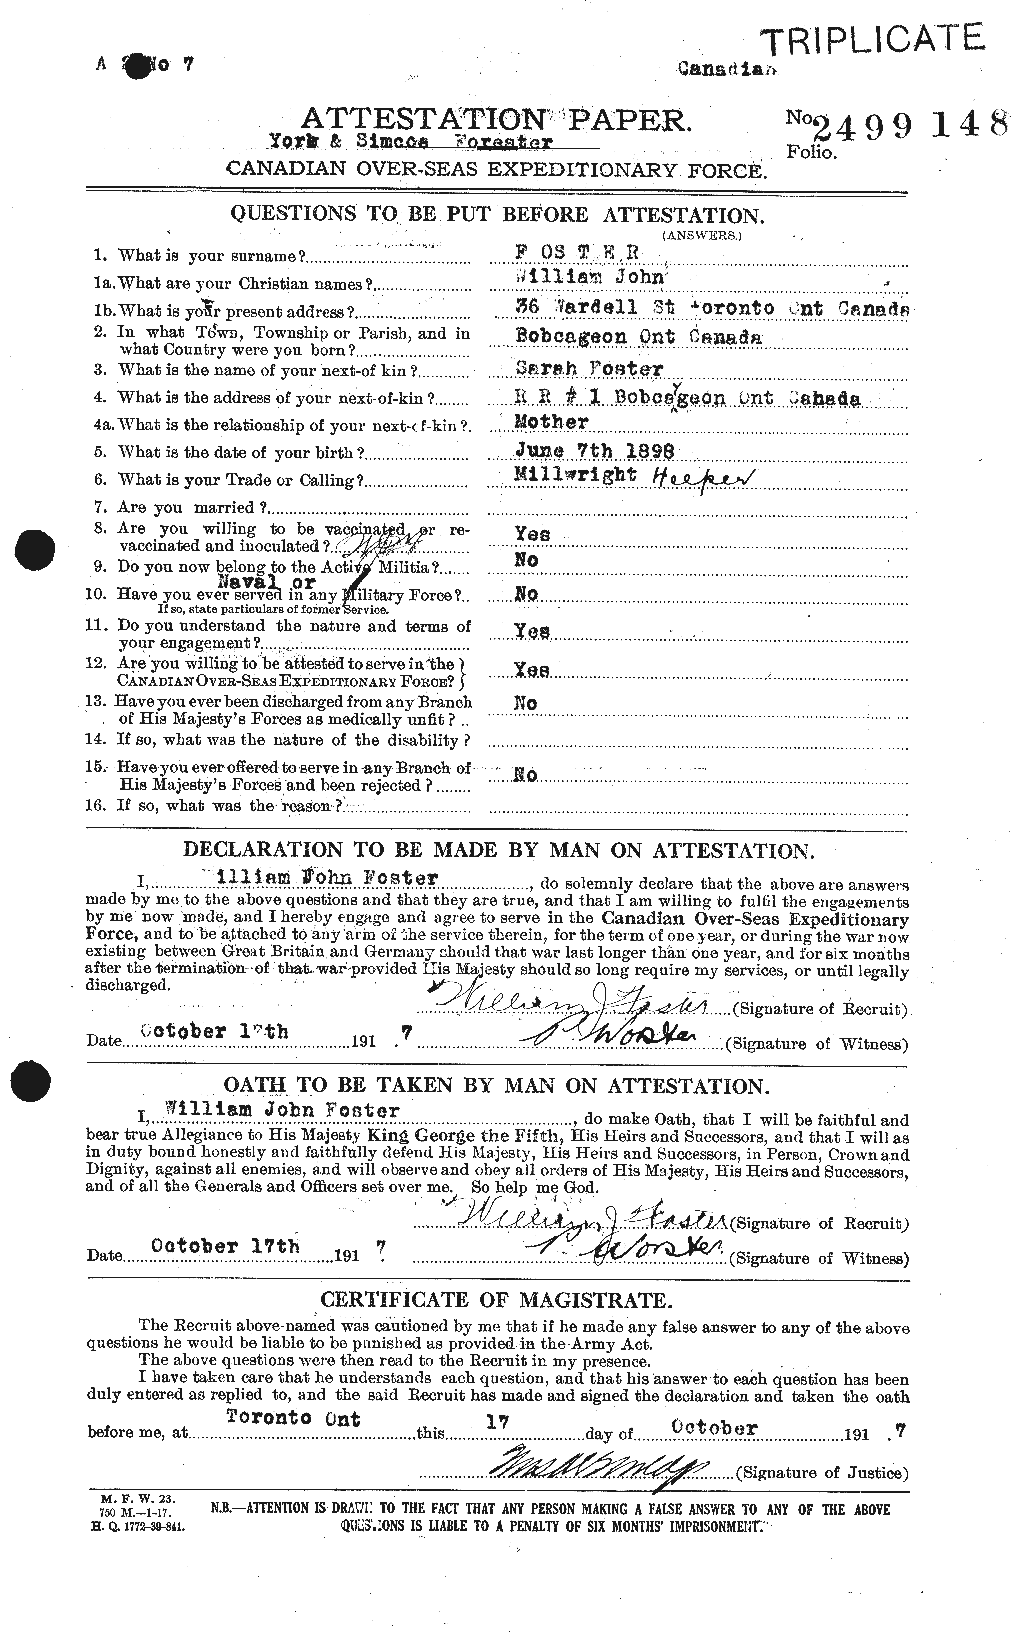 Personnel Records of the First World War - CEF 328761a